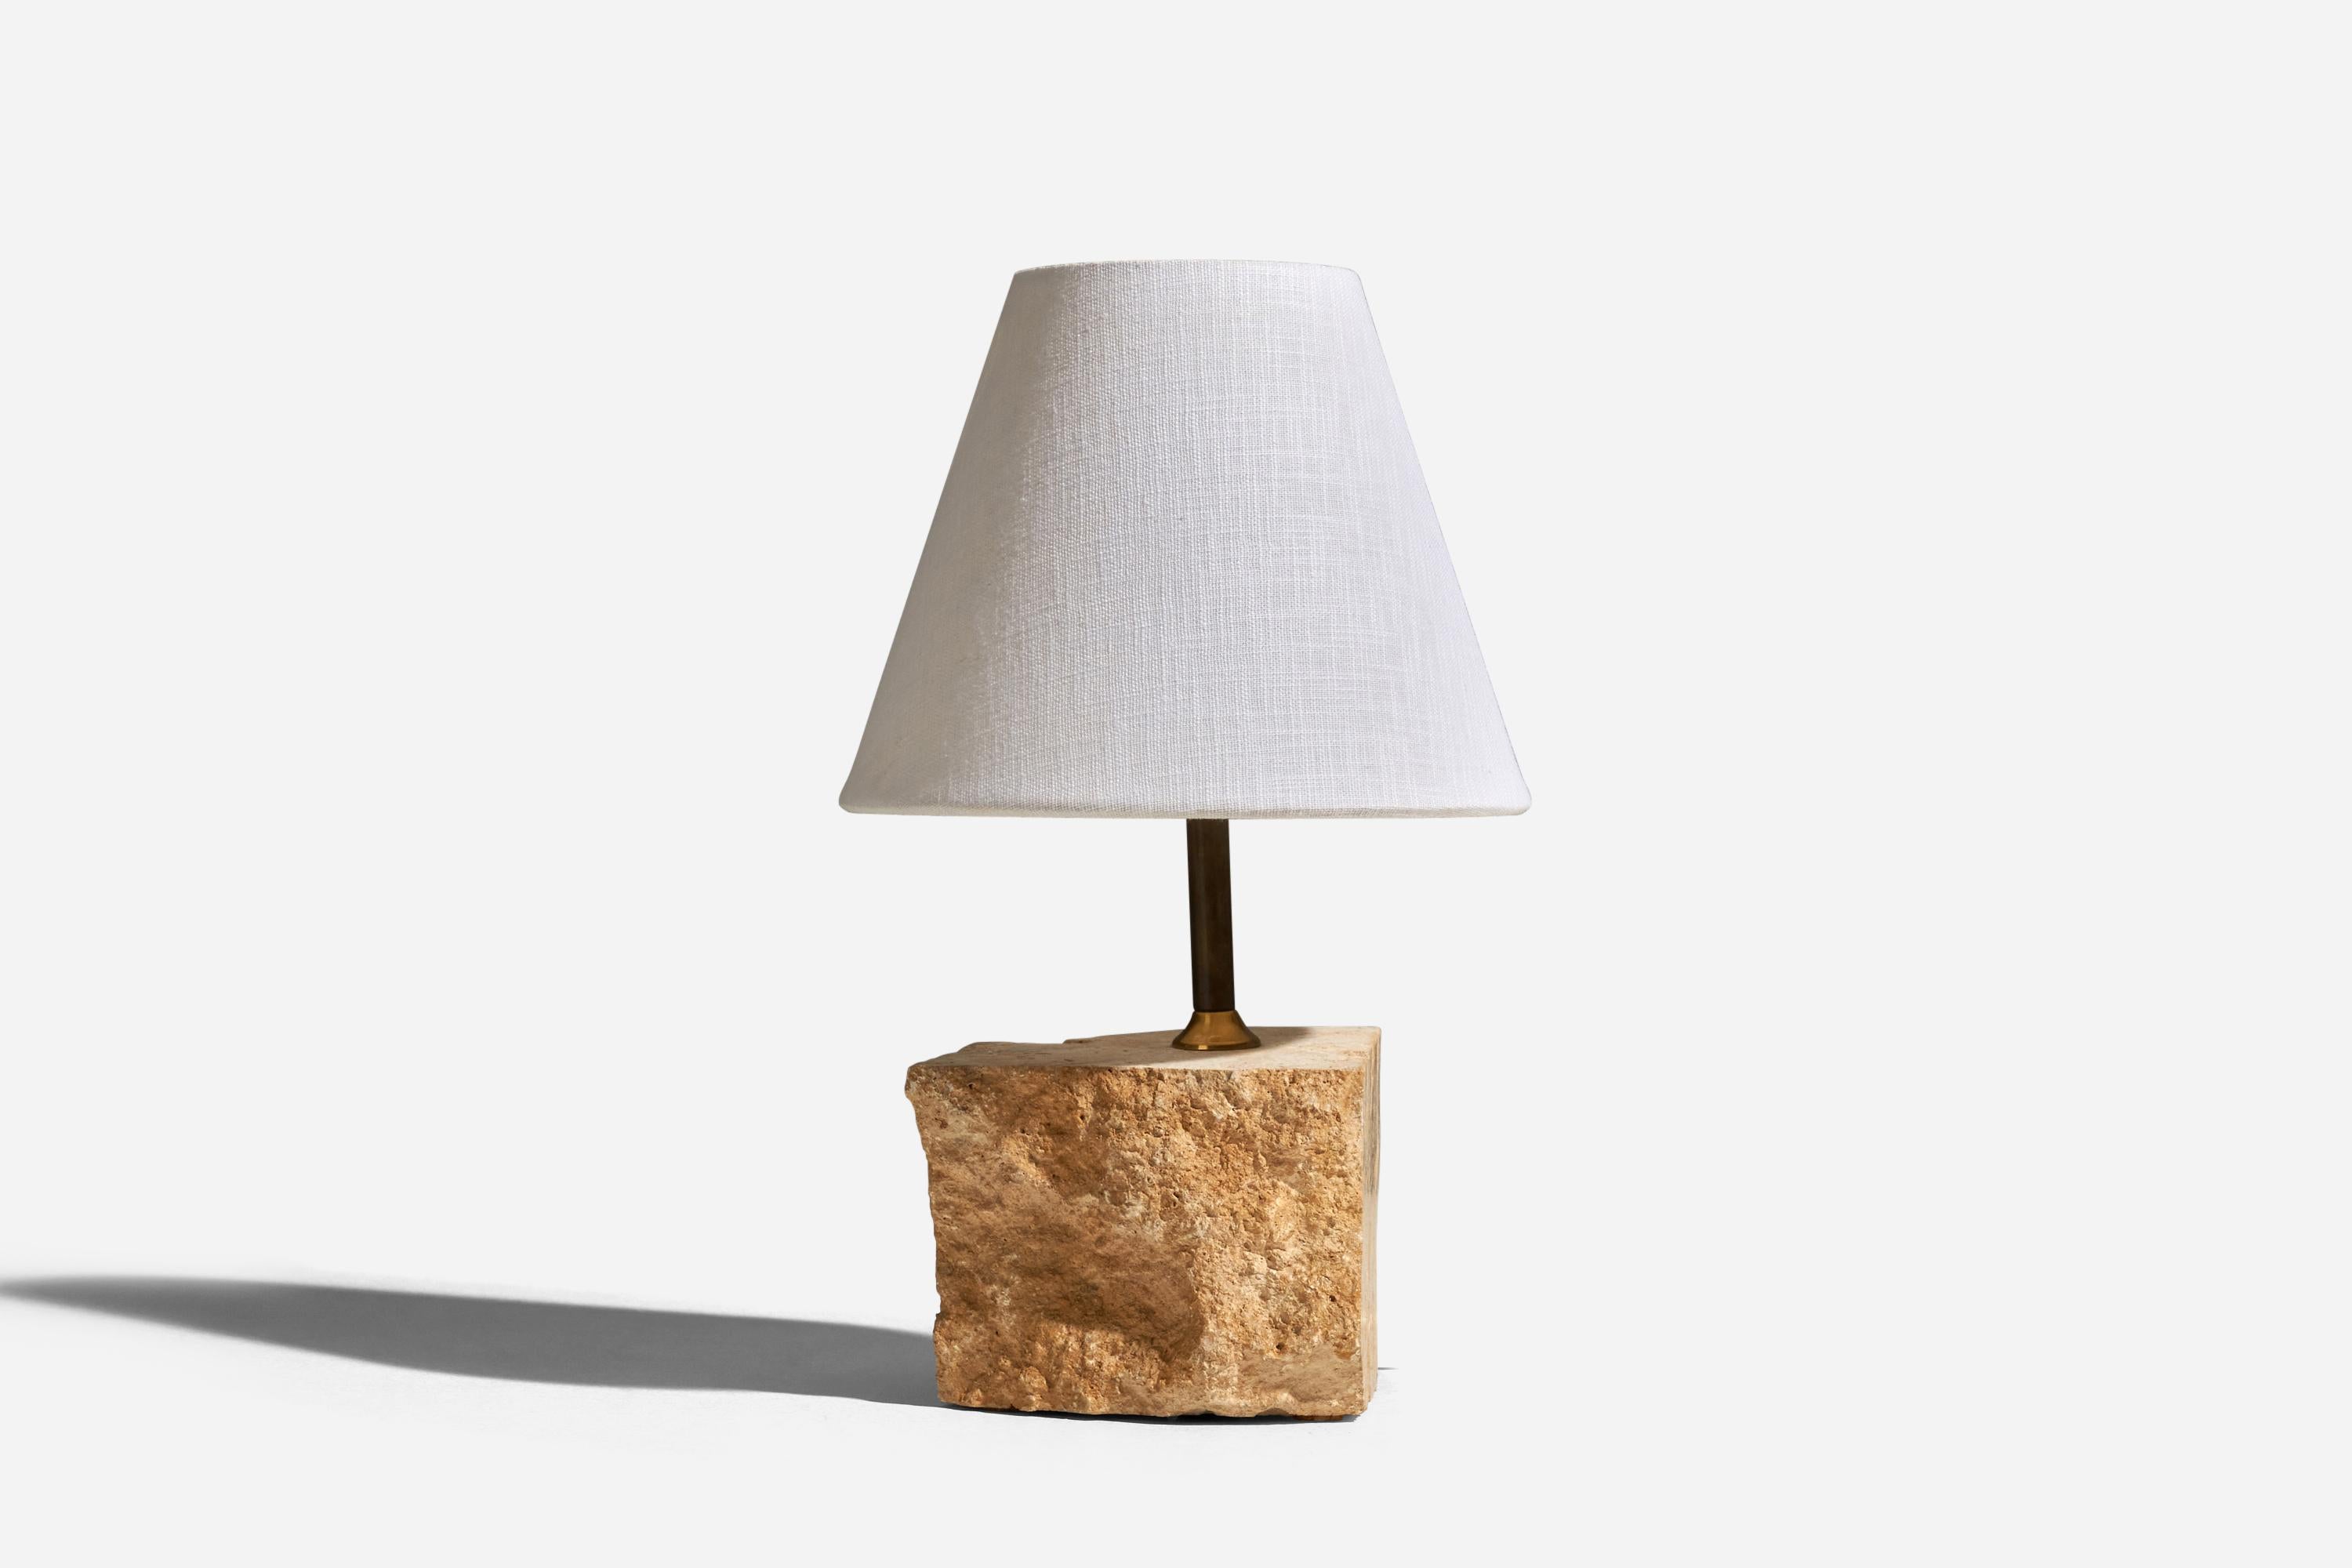 A brass and travertine table lamp designed and produced in Sweden, 1970s.

Sold without Lampshade
Dimensions of Lamp (inches) : 9.62 x 6.81 x 5.06 (Height x Width x Depth)
Dimensions of Lampshade (inches) : 4 x 8 x 6.5 (Top Diameter x Bottom